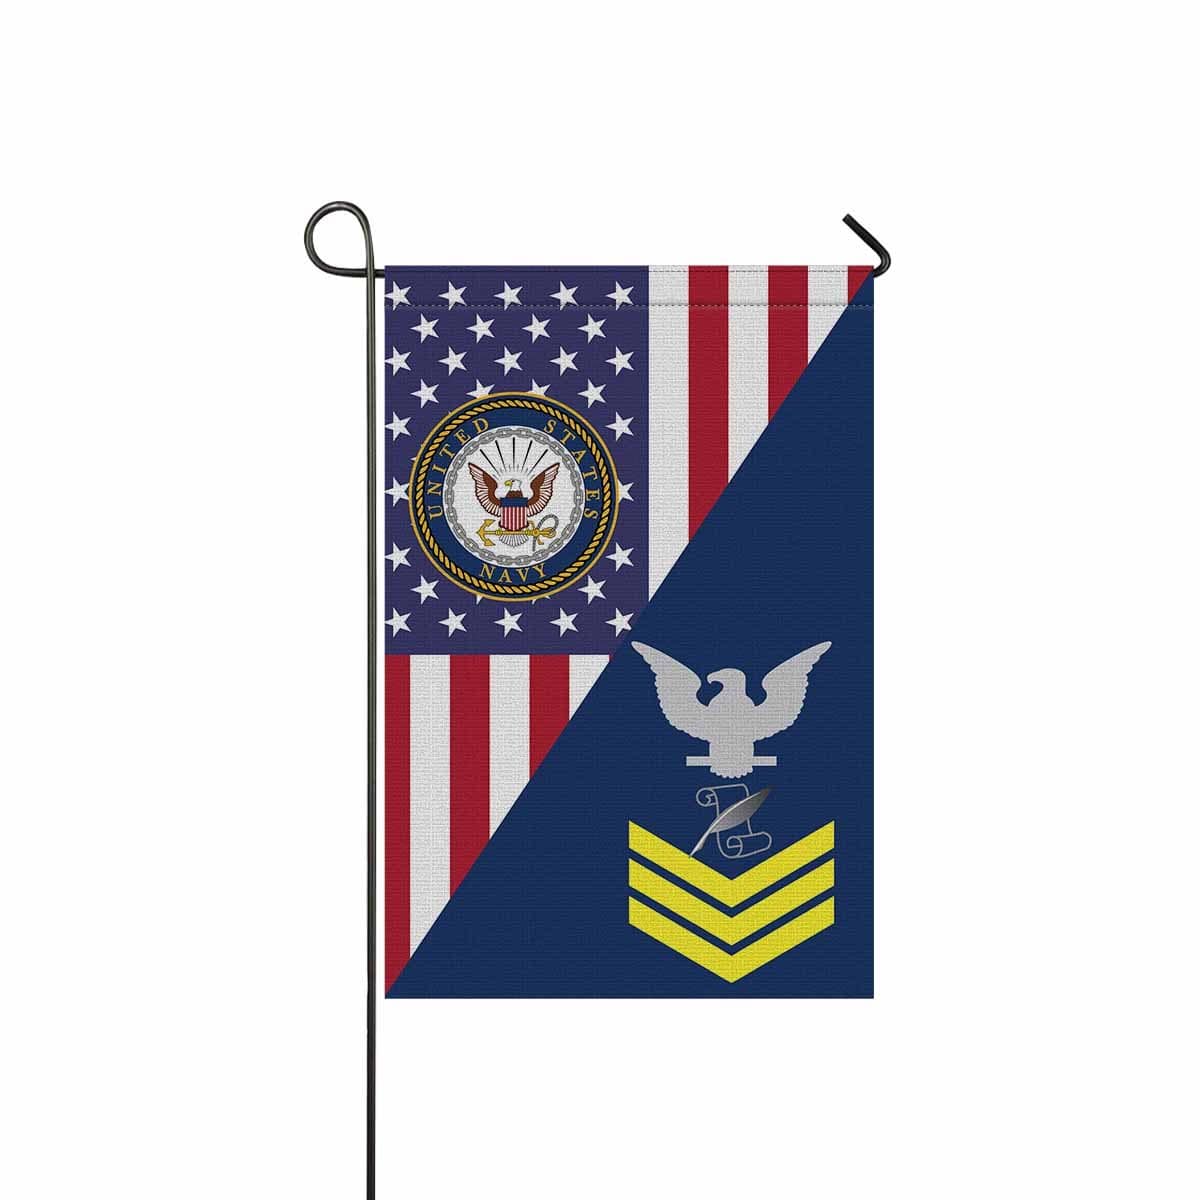 Navy Journalist Navy JO E-6 Gold Stripe Garden Flag/Yard Flag 12 inches x 18 inches Twin-Side Printing-GDFlag-Navy-Rating-Veterans Nation